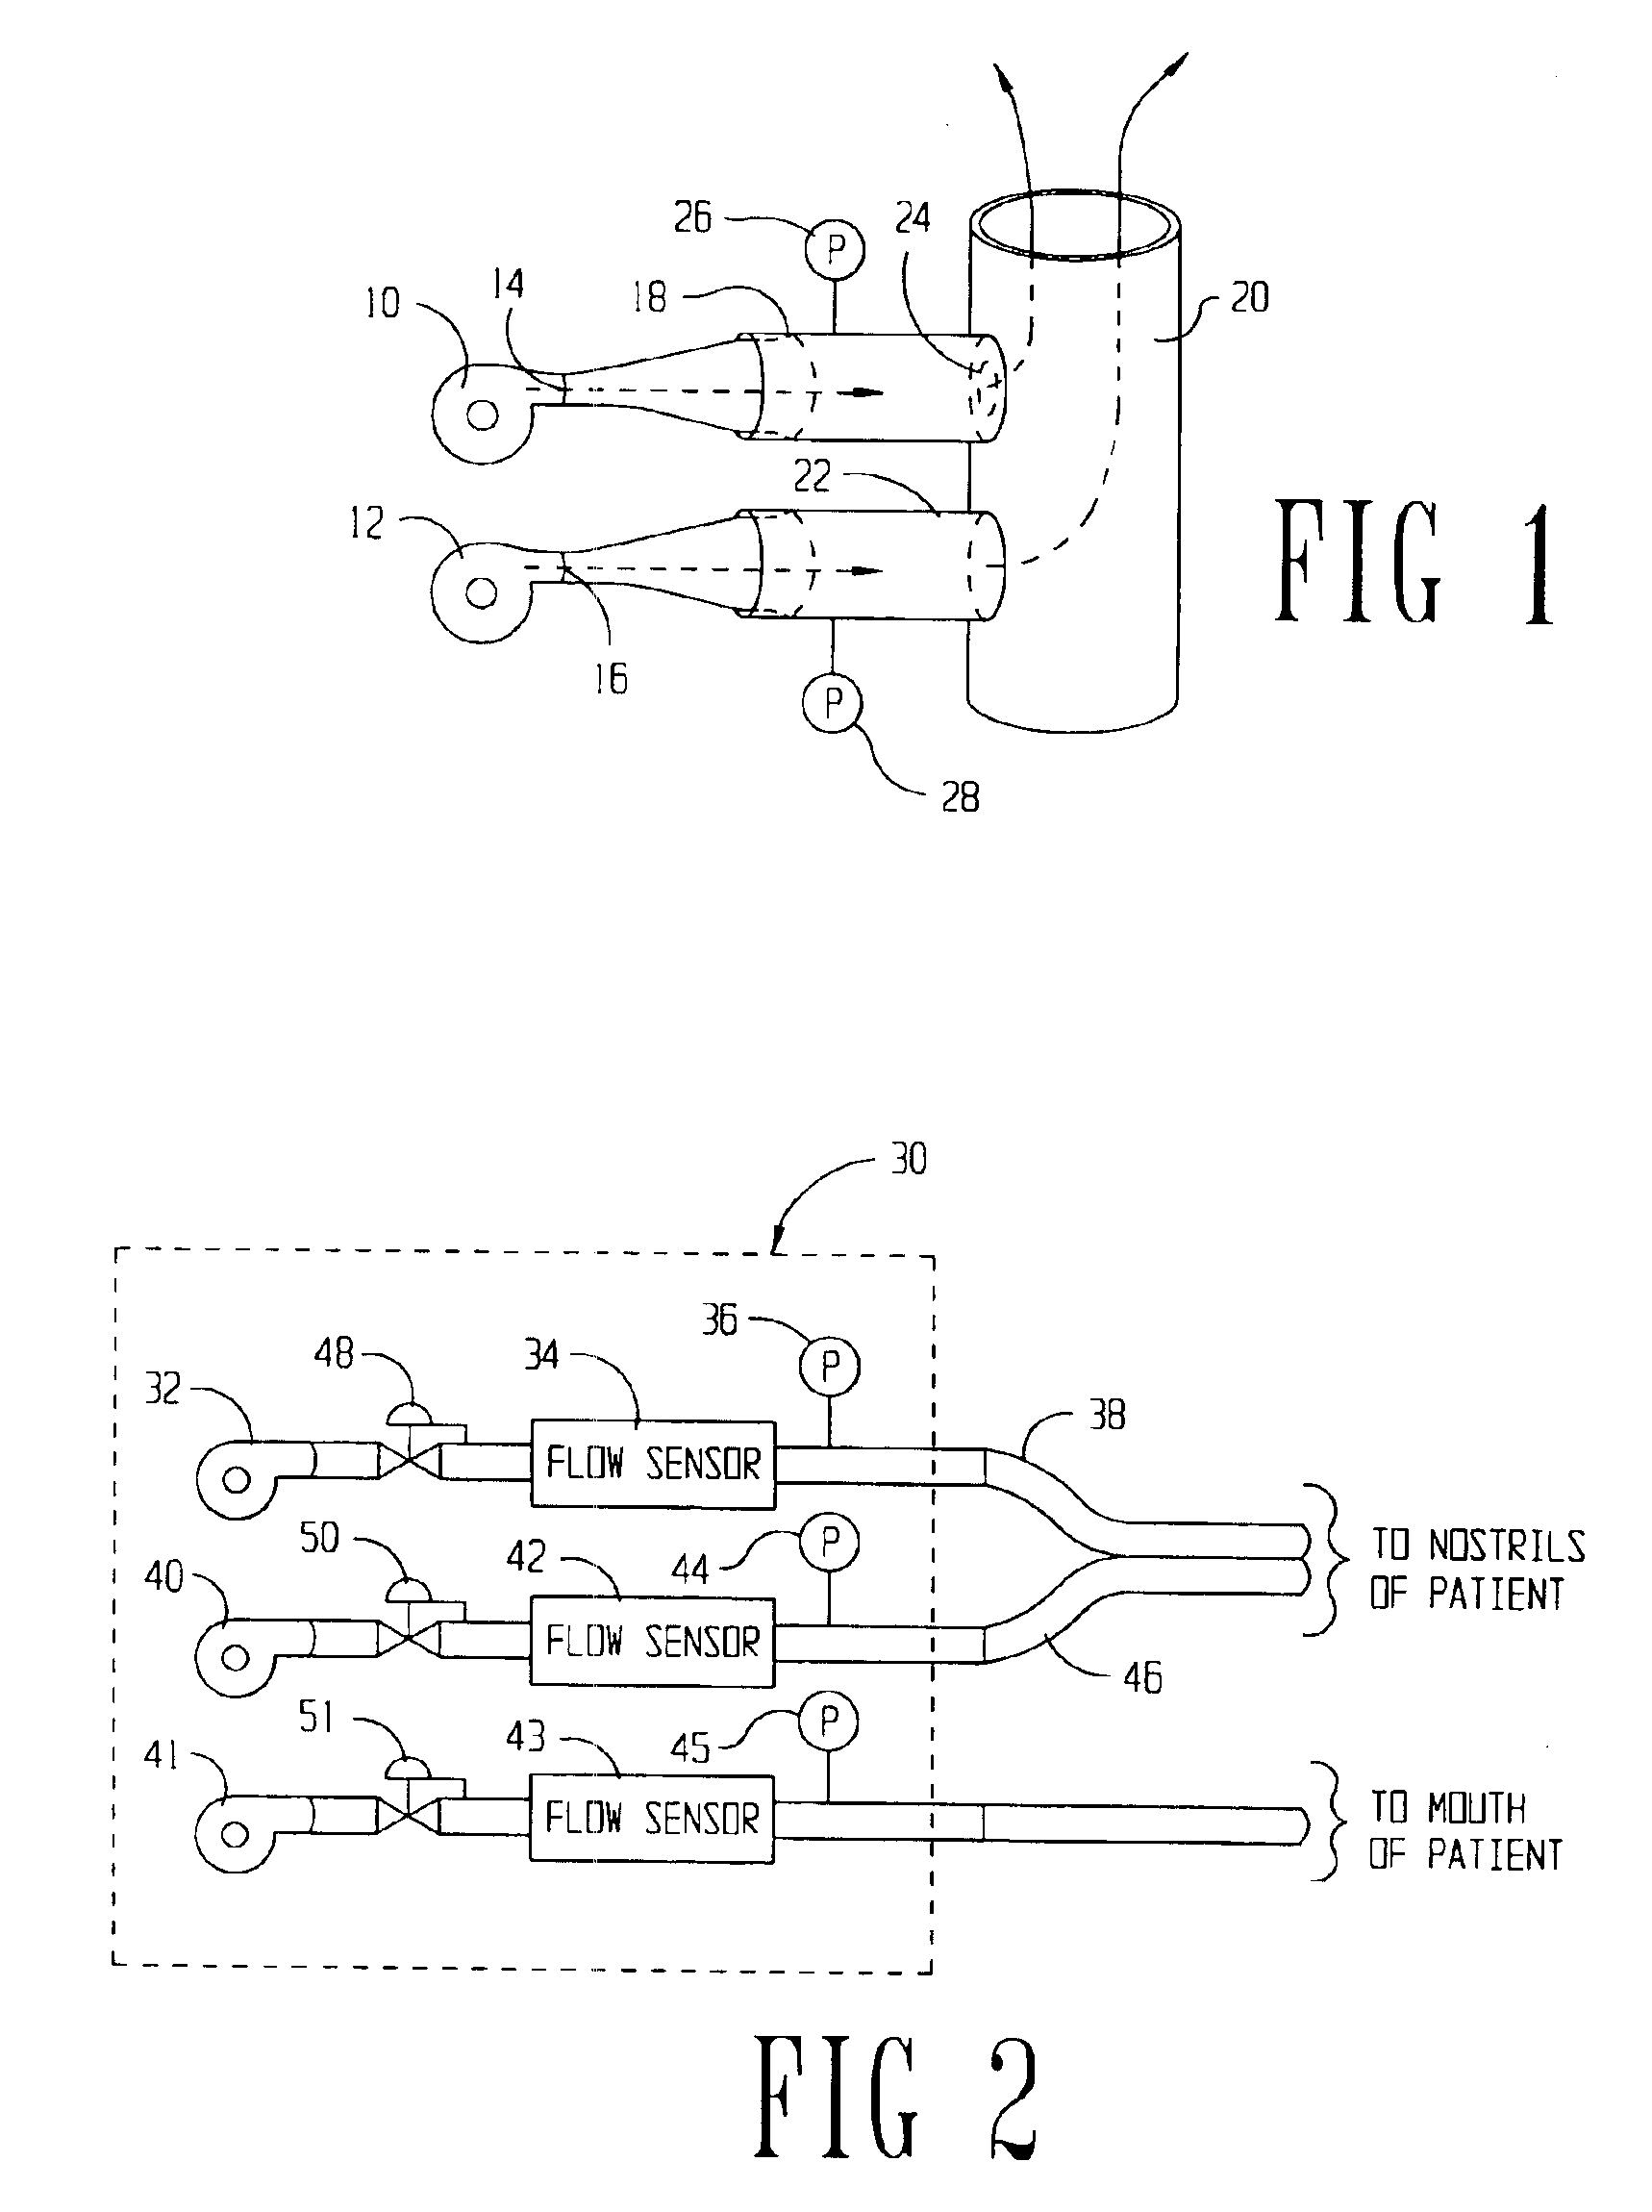 Method and system of individually controlling airway pressure of a patient's nares